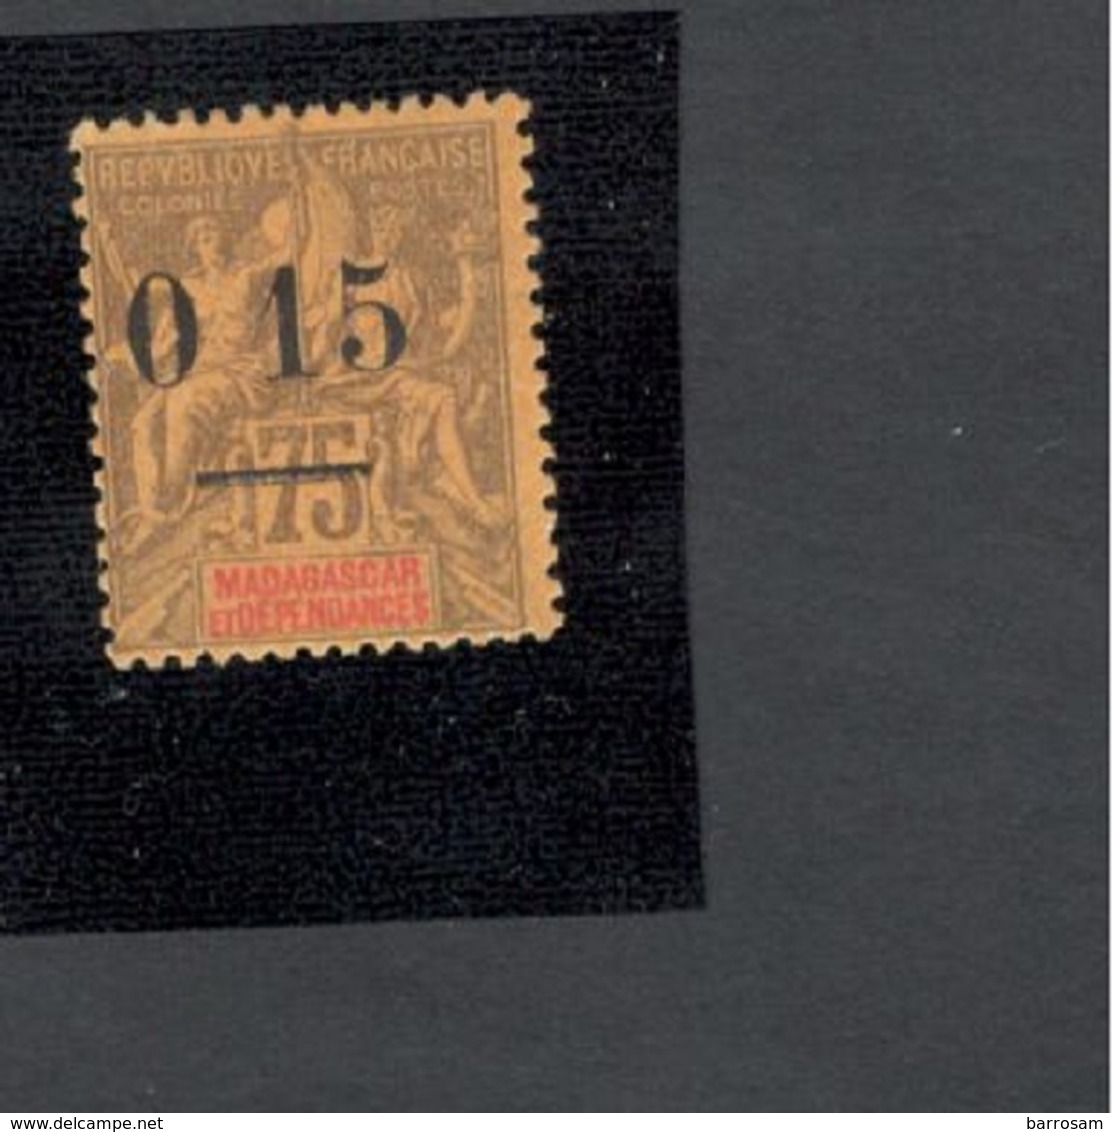 MADAGASCAR1902: Yvert54b Mh* Stamp Overprint Has No Comma Cat.Value280Euros($308) - Unused Stamps